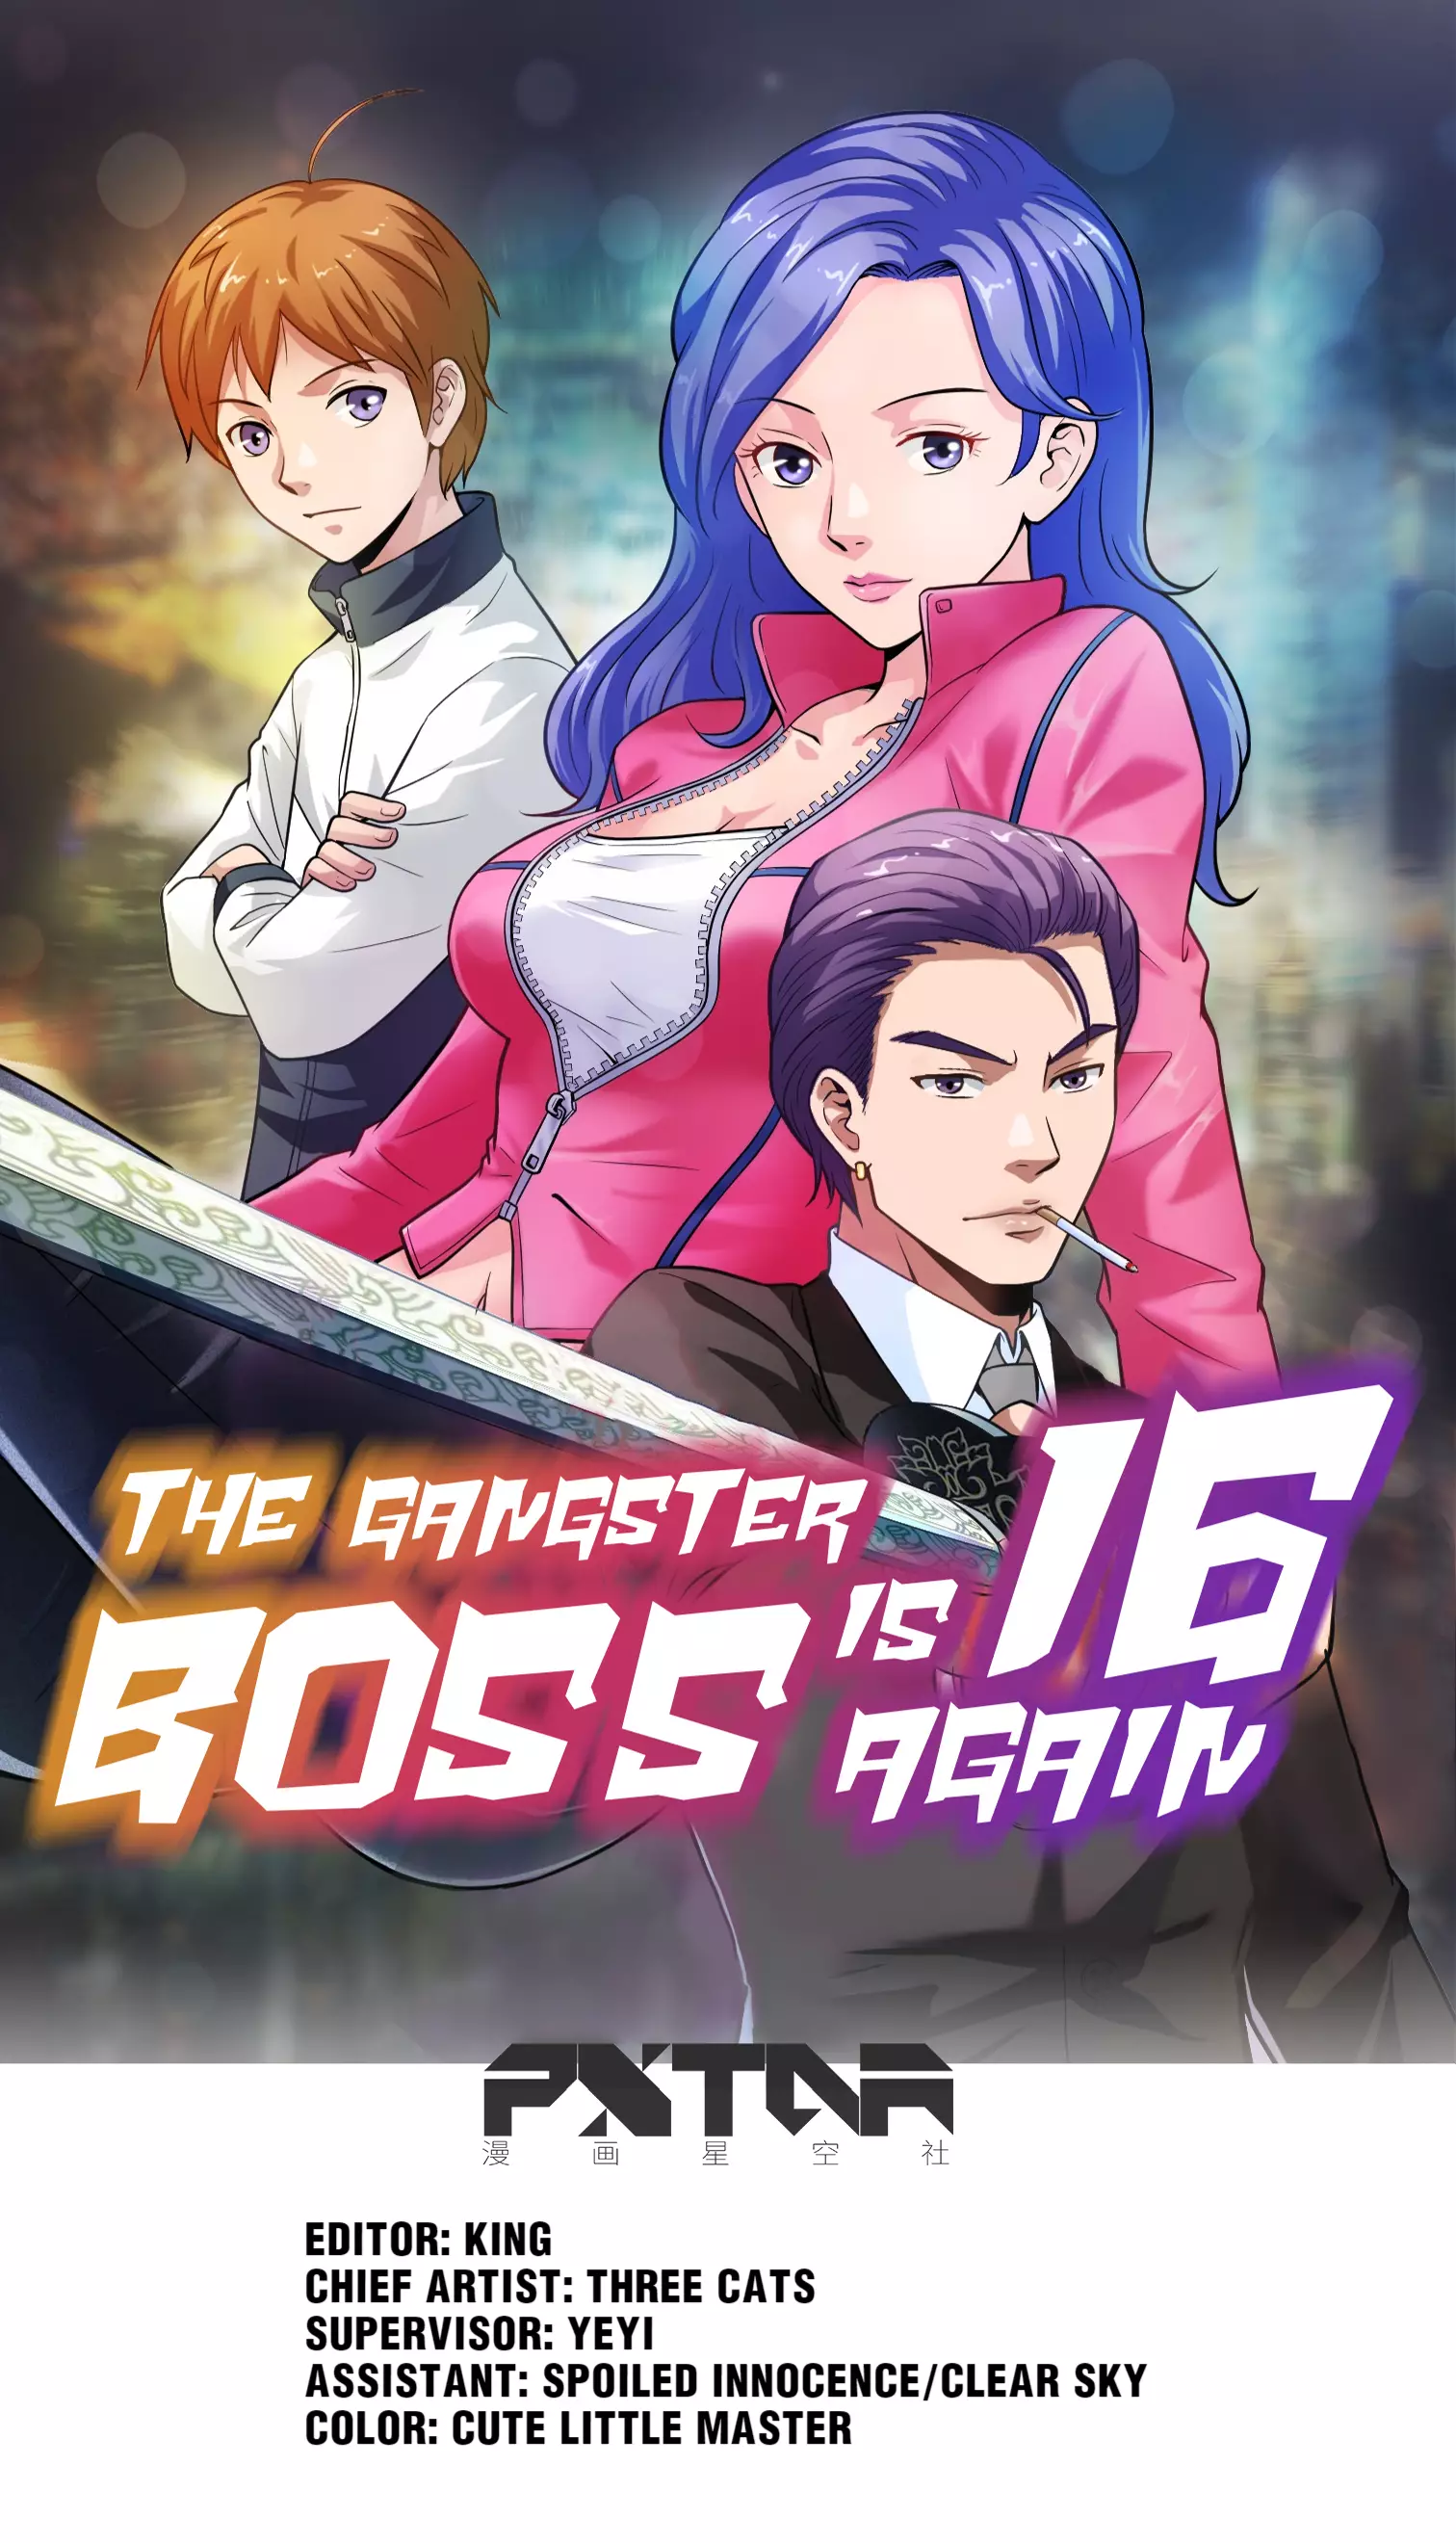 The Gangster Boss Is 16 Again - 29 page 1-5f2d6f99